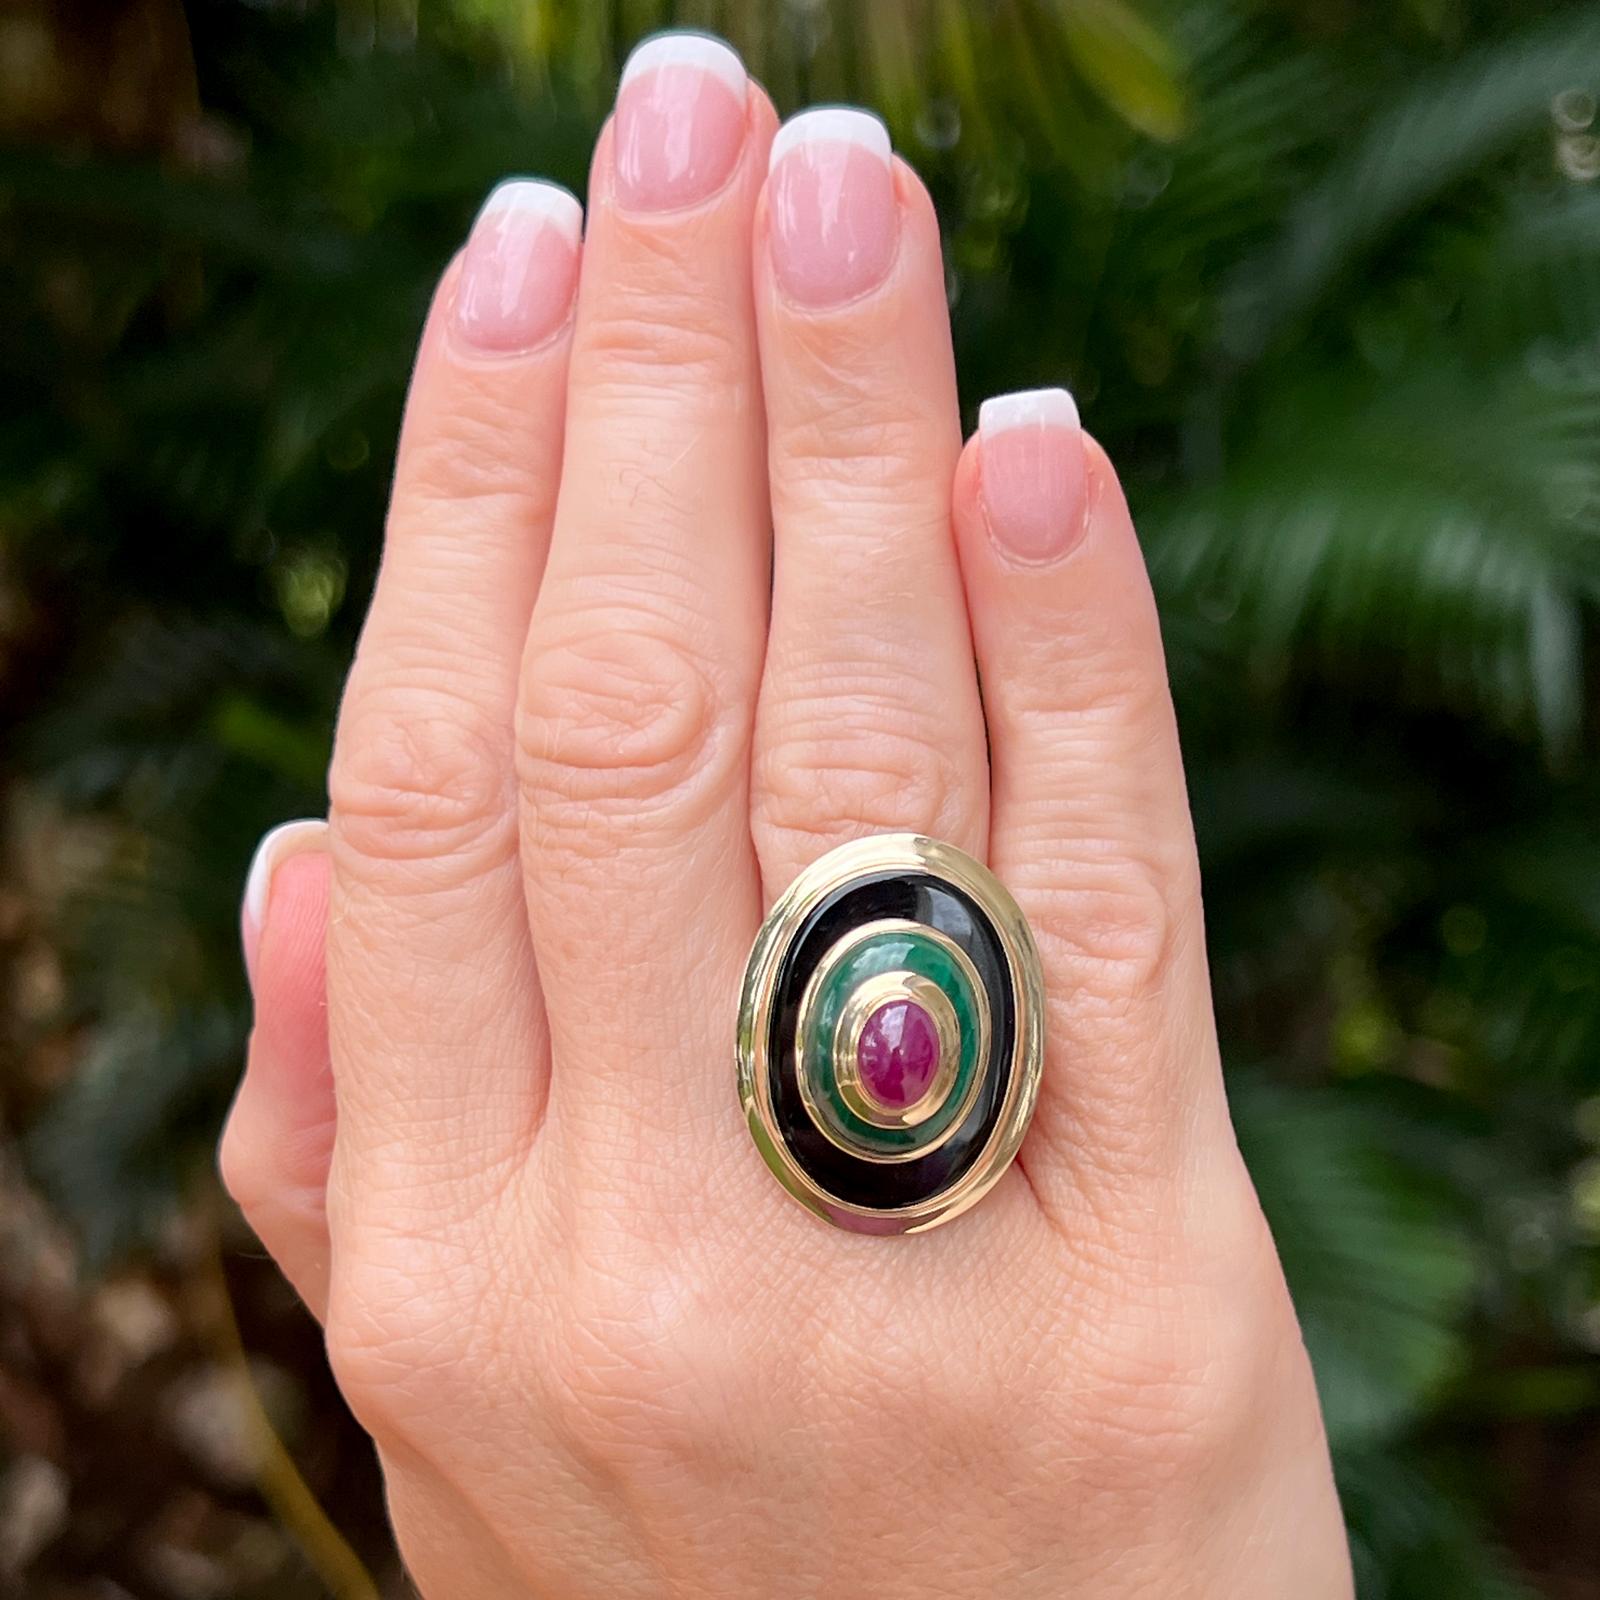 Contemporary late twentieth century onyx, ruby, and enamel cocktail ring crafted in 14 karat yellow gold. The oval vintage ring features cabochon black onyx, green enamel, inlay, and a cabochon red ruby gemstone. The oval top measures 22 x 30mm, and